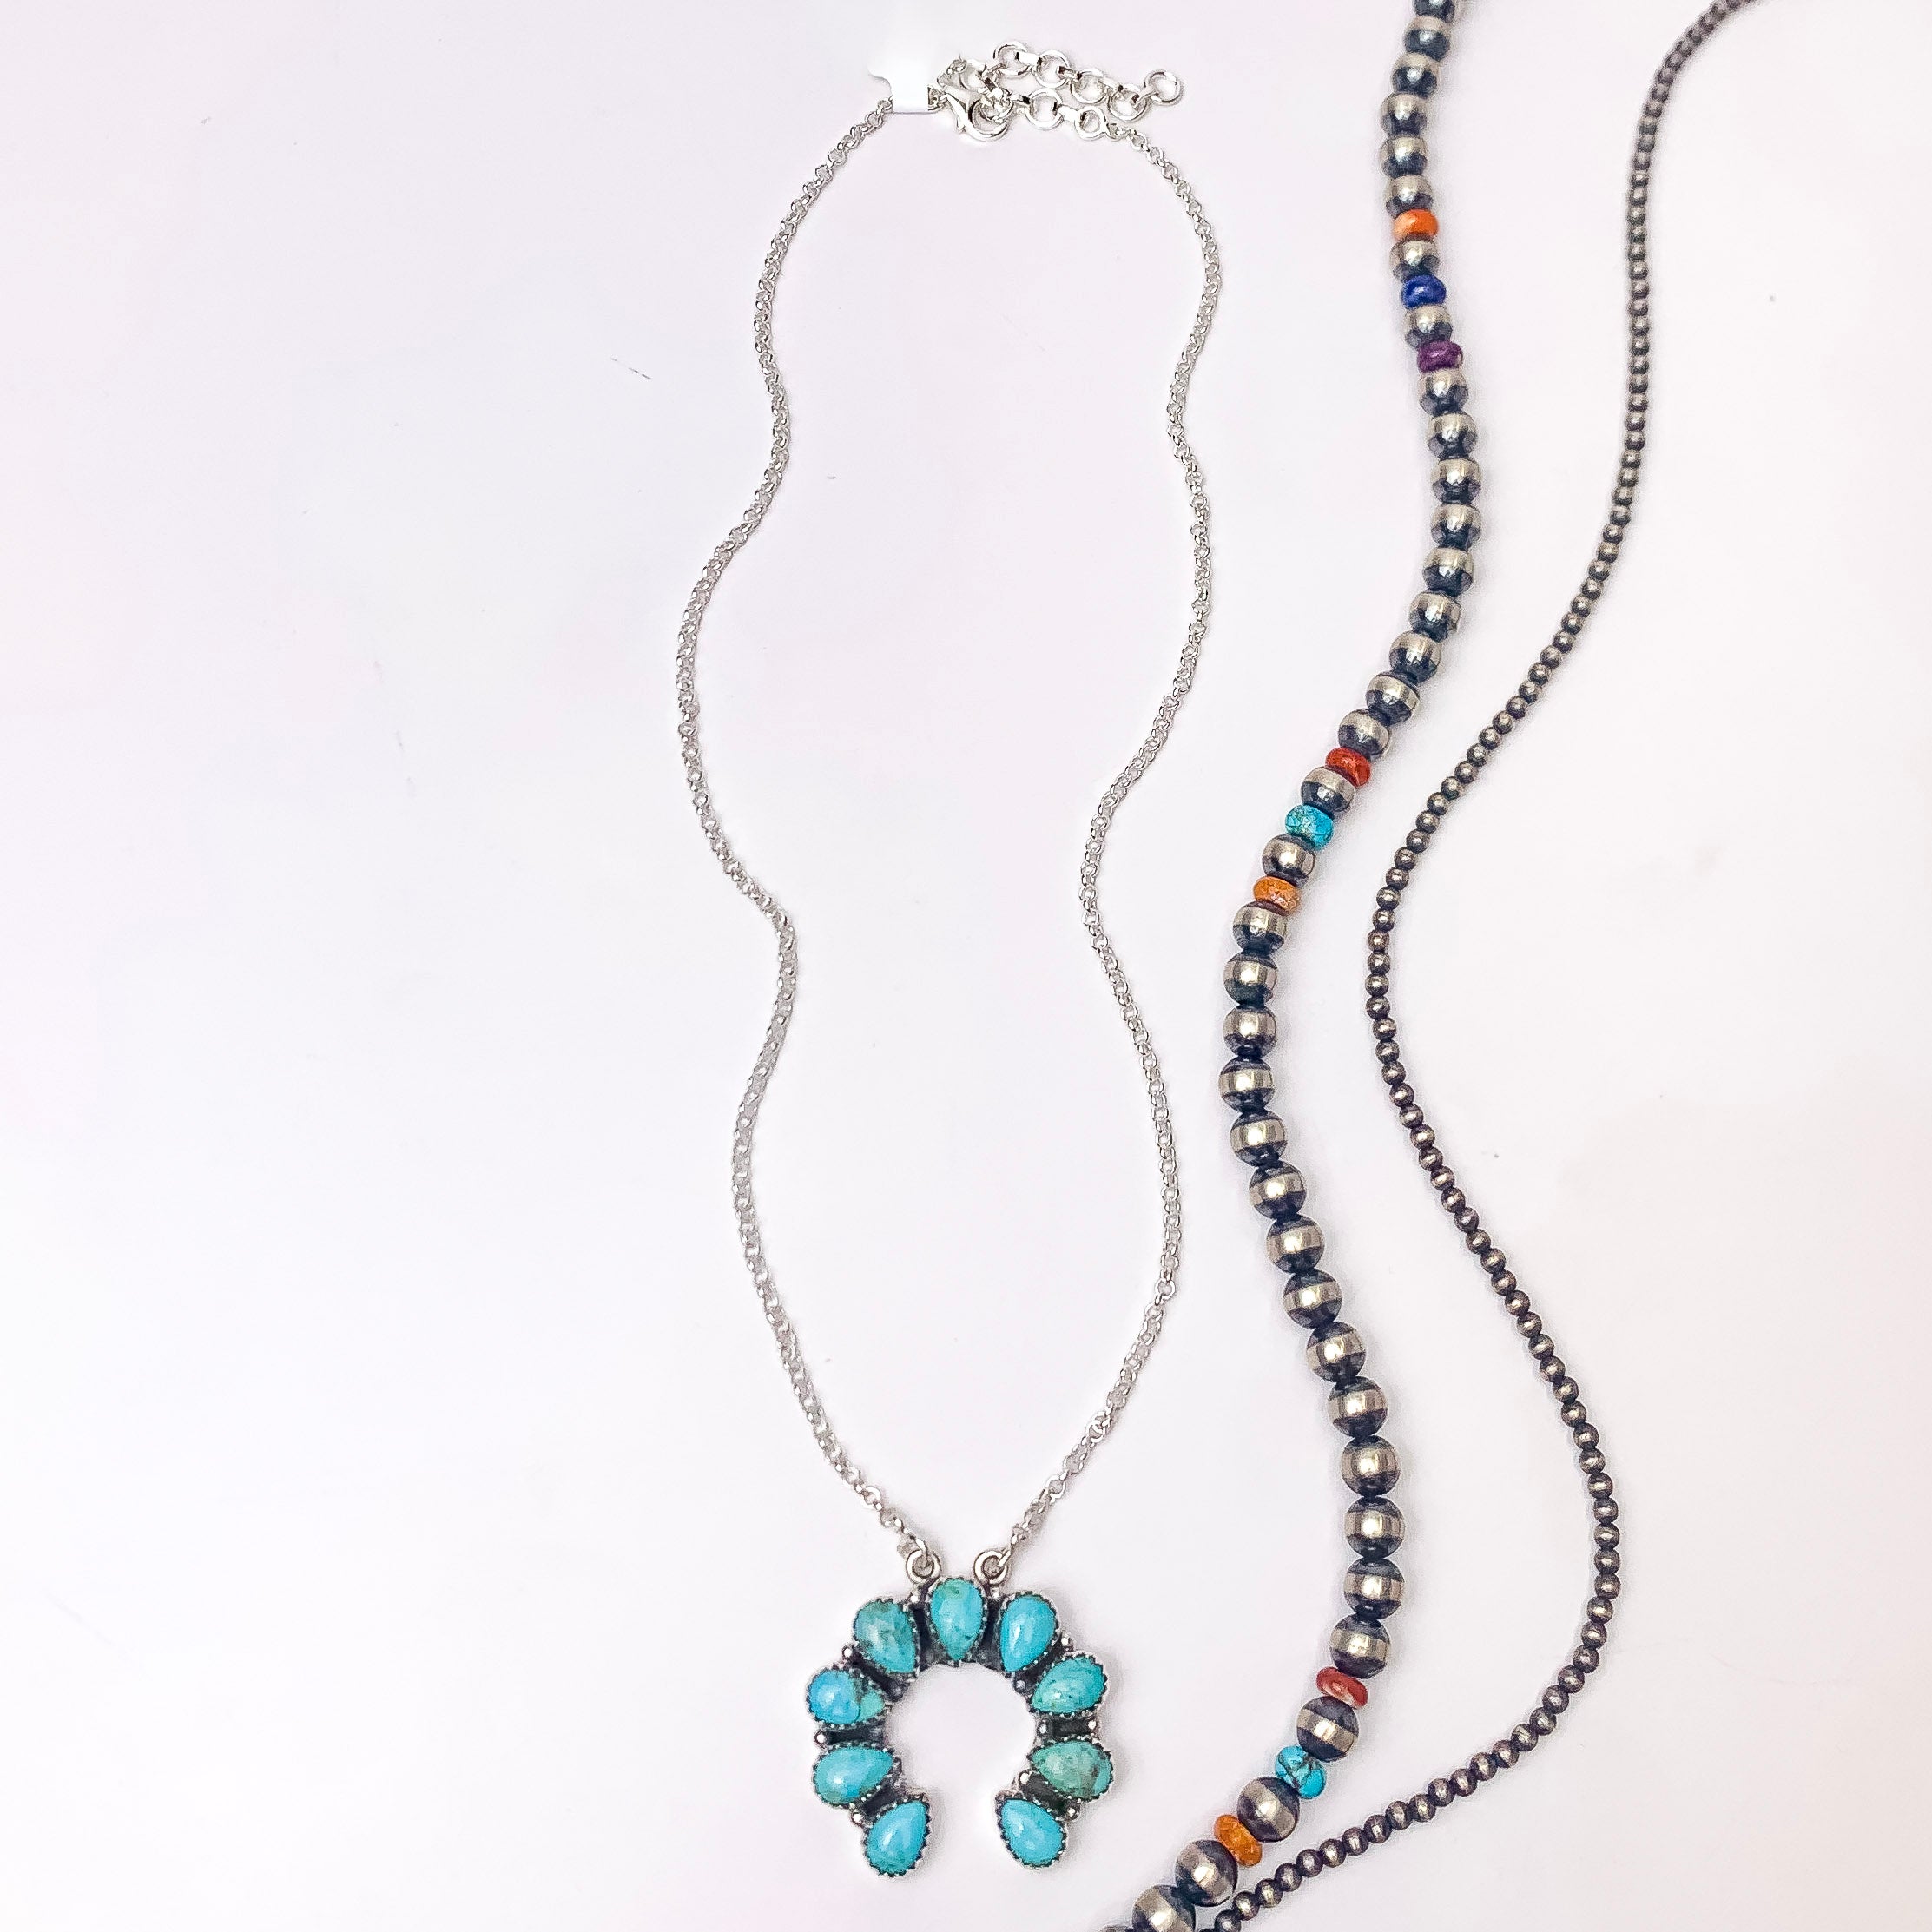 Hada Collection | Handmade Sterling Silver Necklace with Kingman Turquoise Naja Pendant - Giddy Up Glamour Boutique